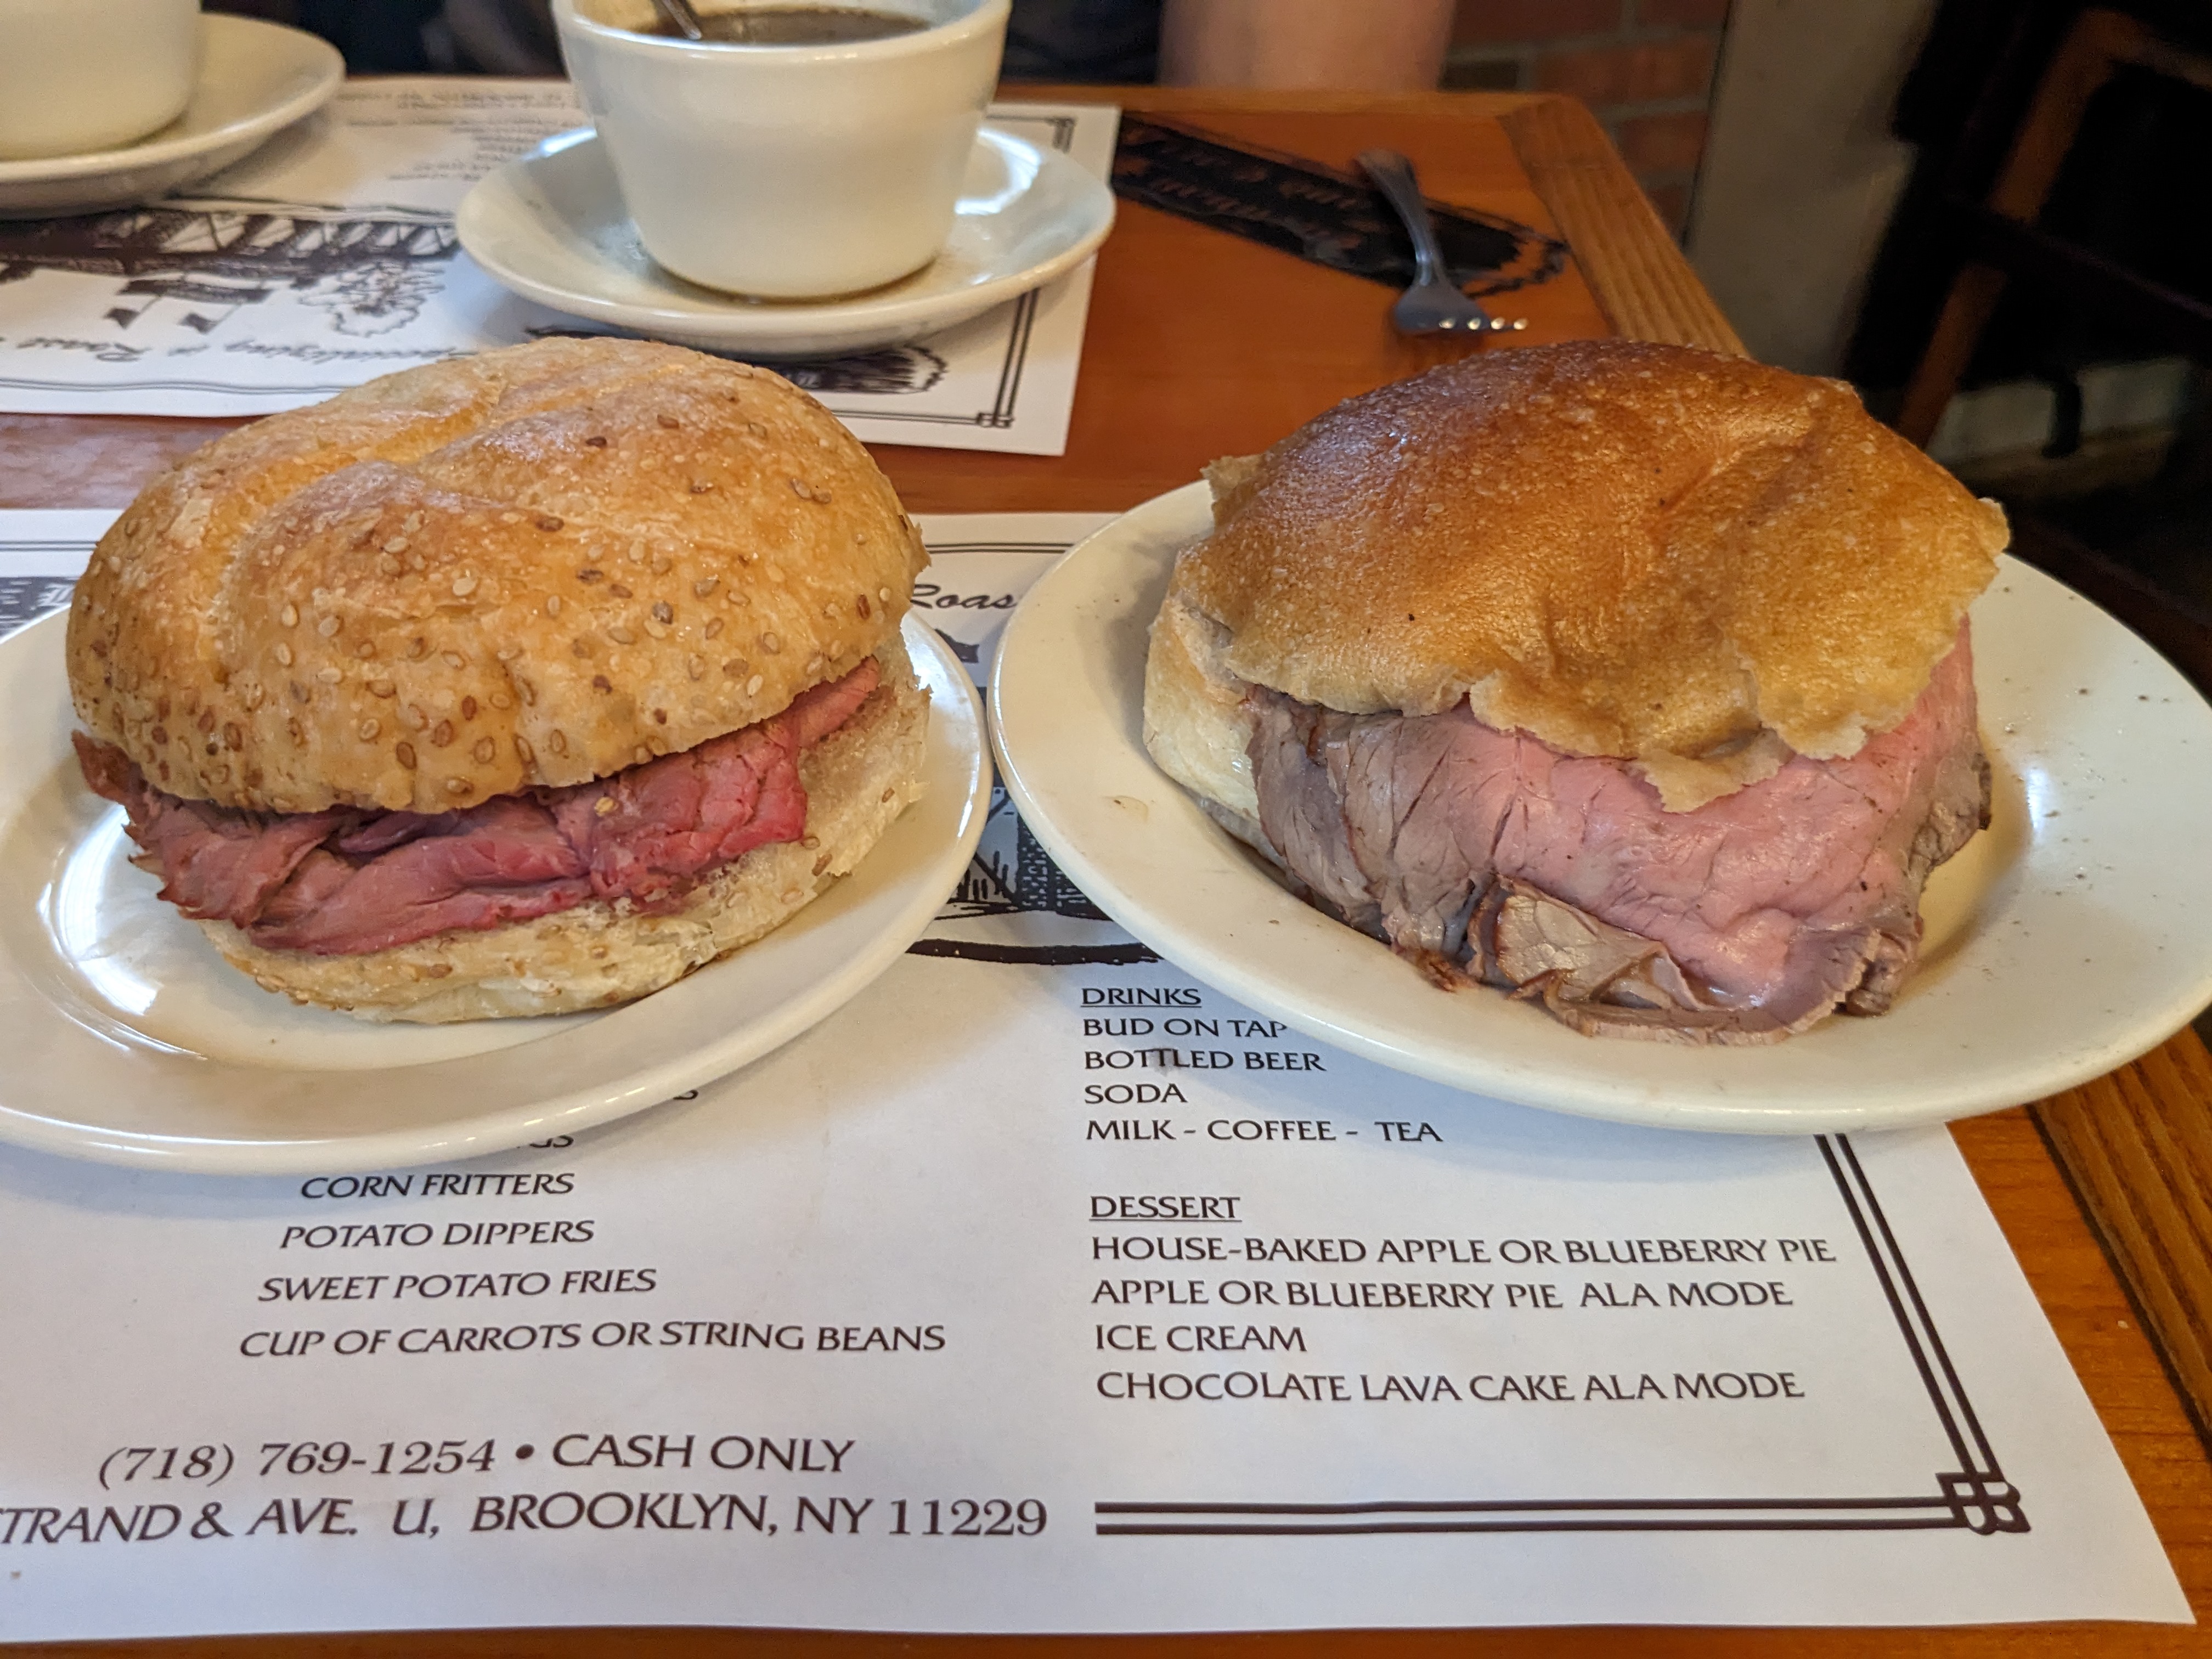 Two sandwiches side by side on Kaiser rolls.